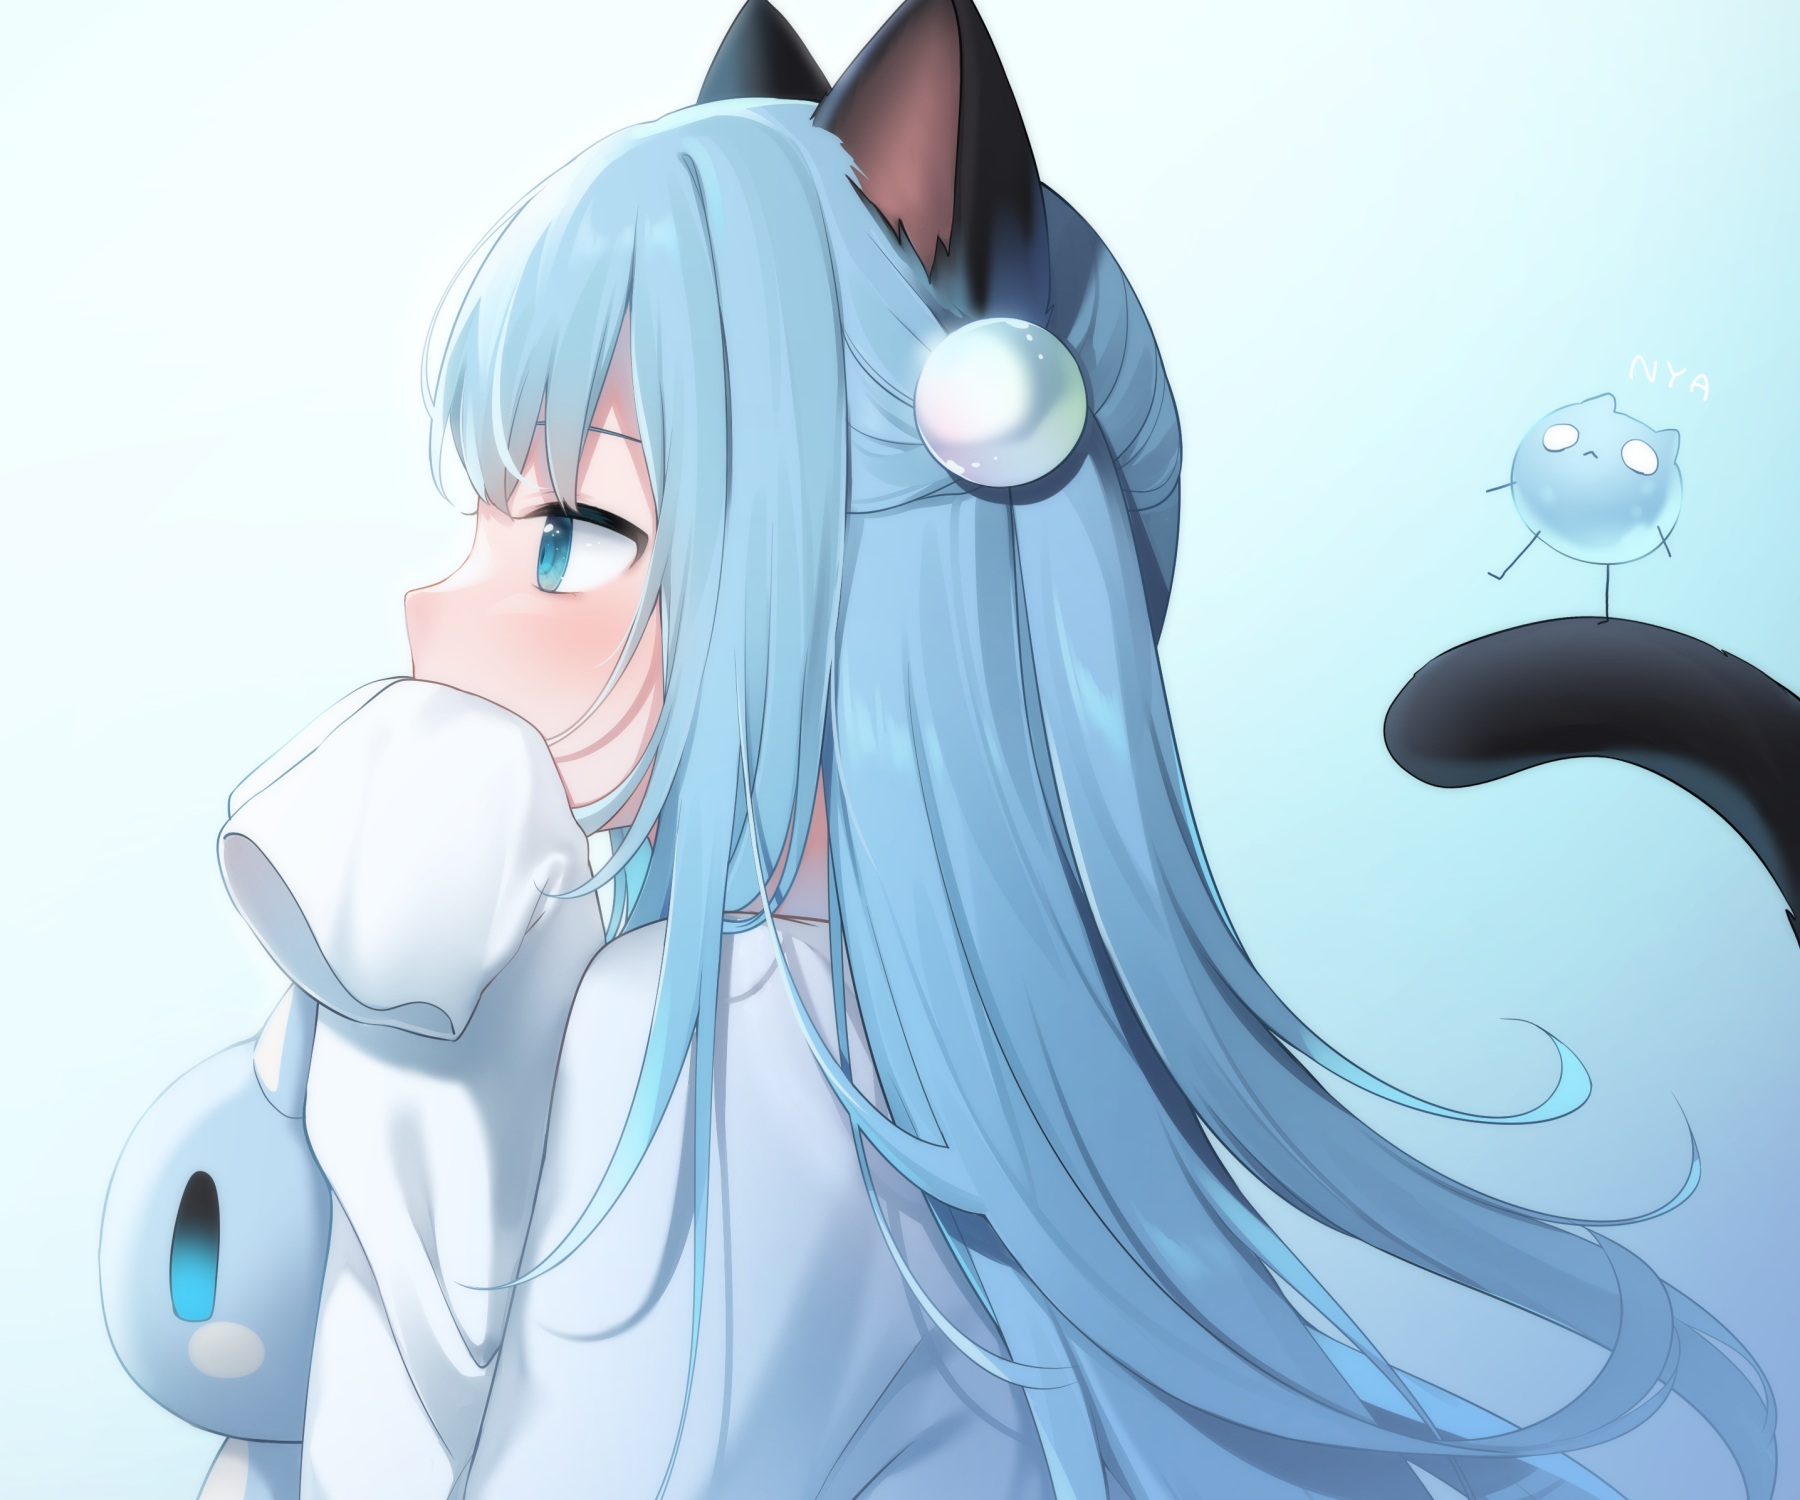 Download 2560x1600 Cute Anime Girl, Aqua Hair, Profile View, Tail, Cat Girl, Baggy Clothes Wallpaper for MacBook Pro 13 inch